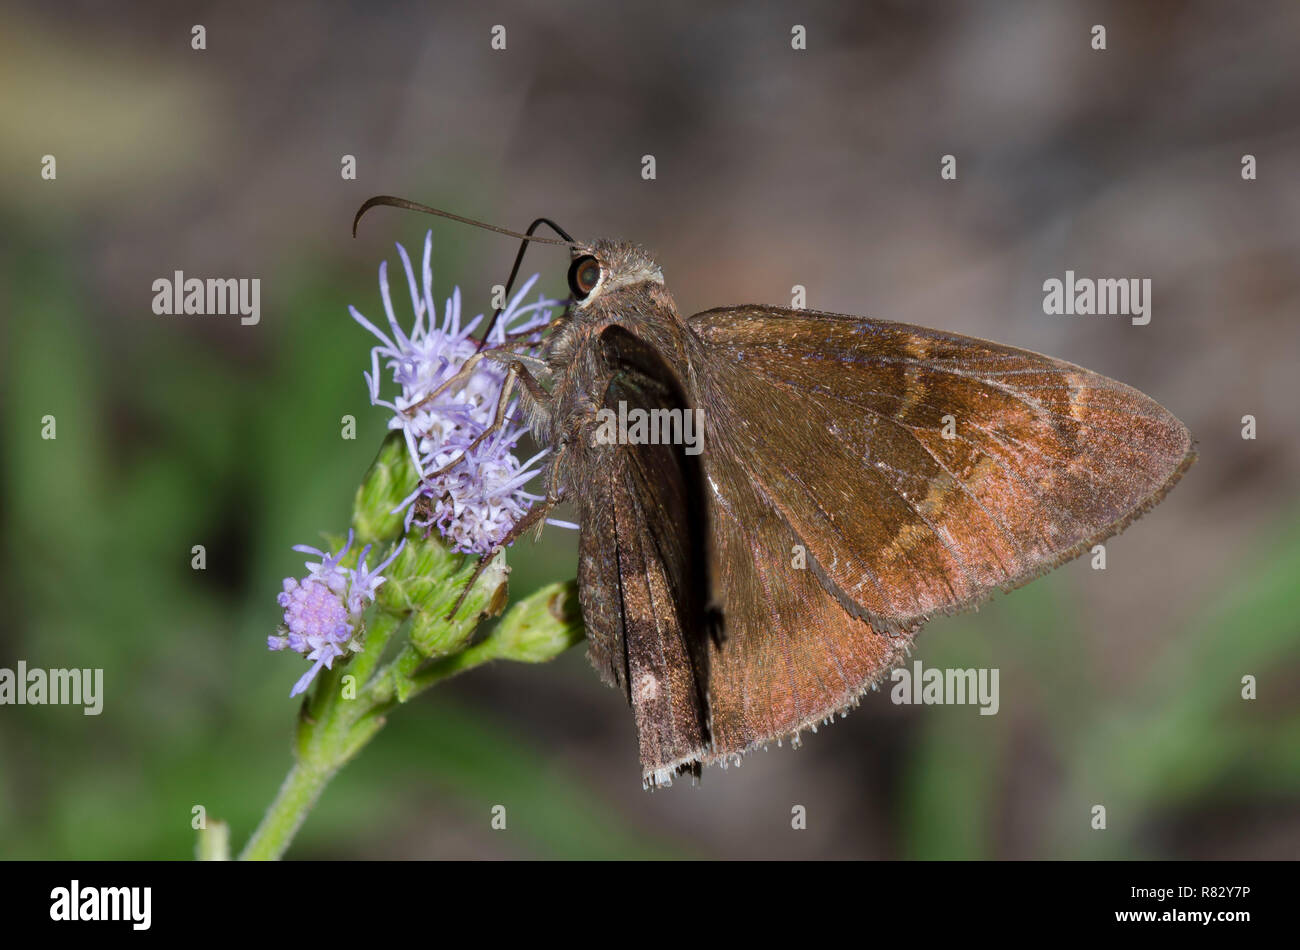 Coyote Cloudywing, Cecropterus coyote, on mist flower, Conoclinium sp. Stock Photo